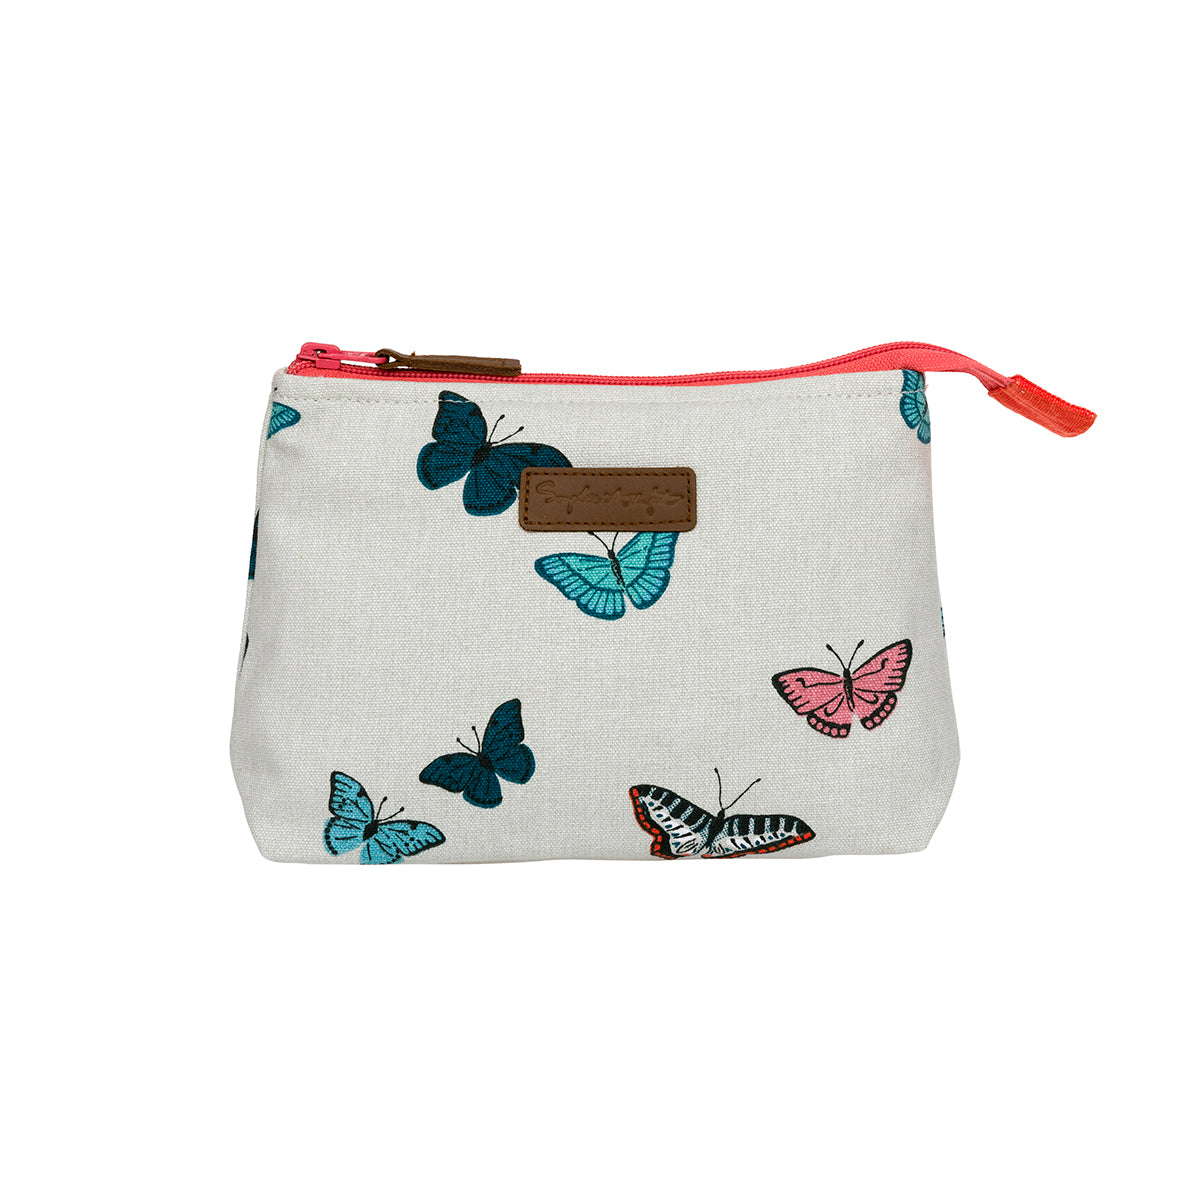 Makeup bag by Sophie Allport covered in colourful butterflies.